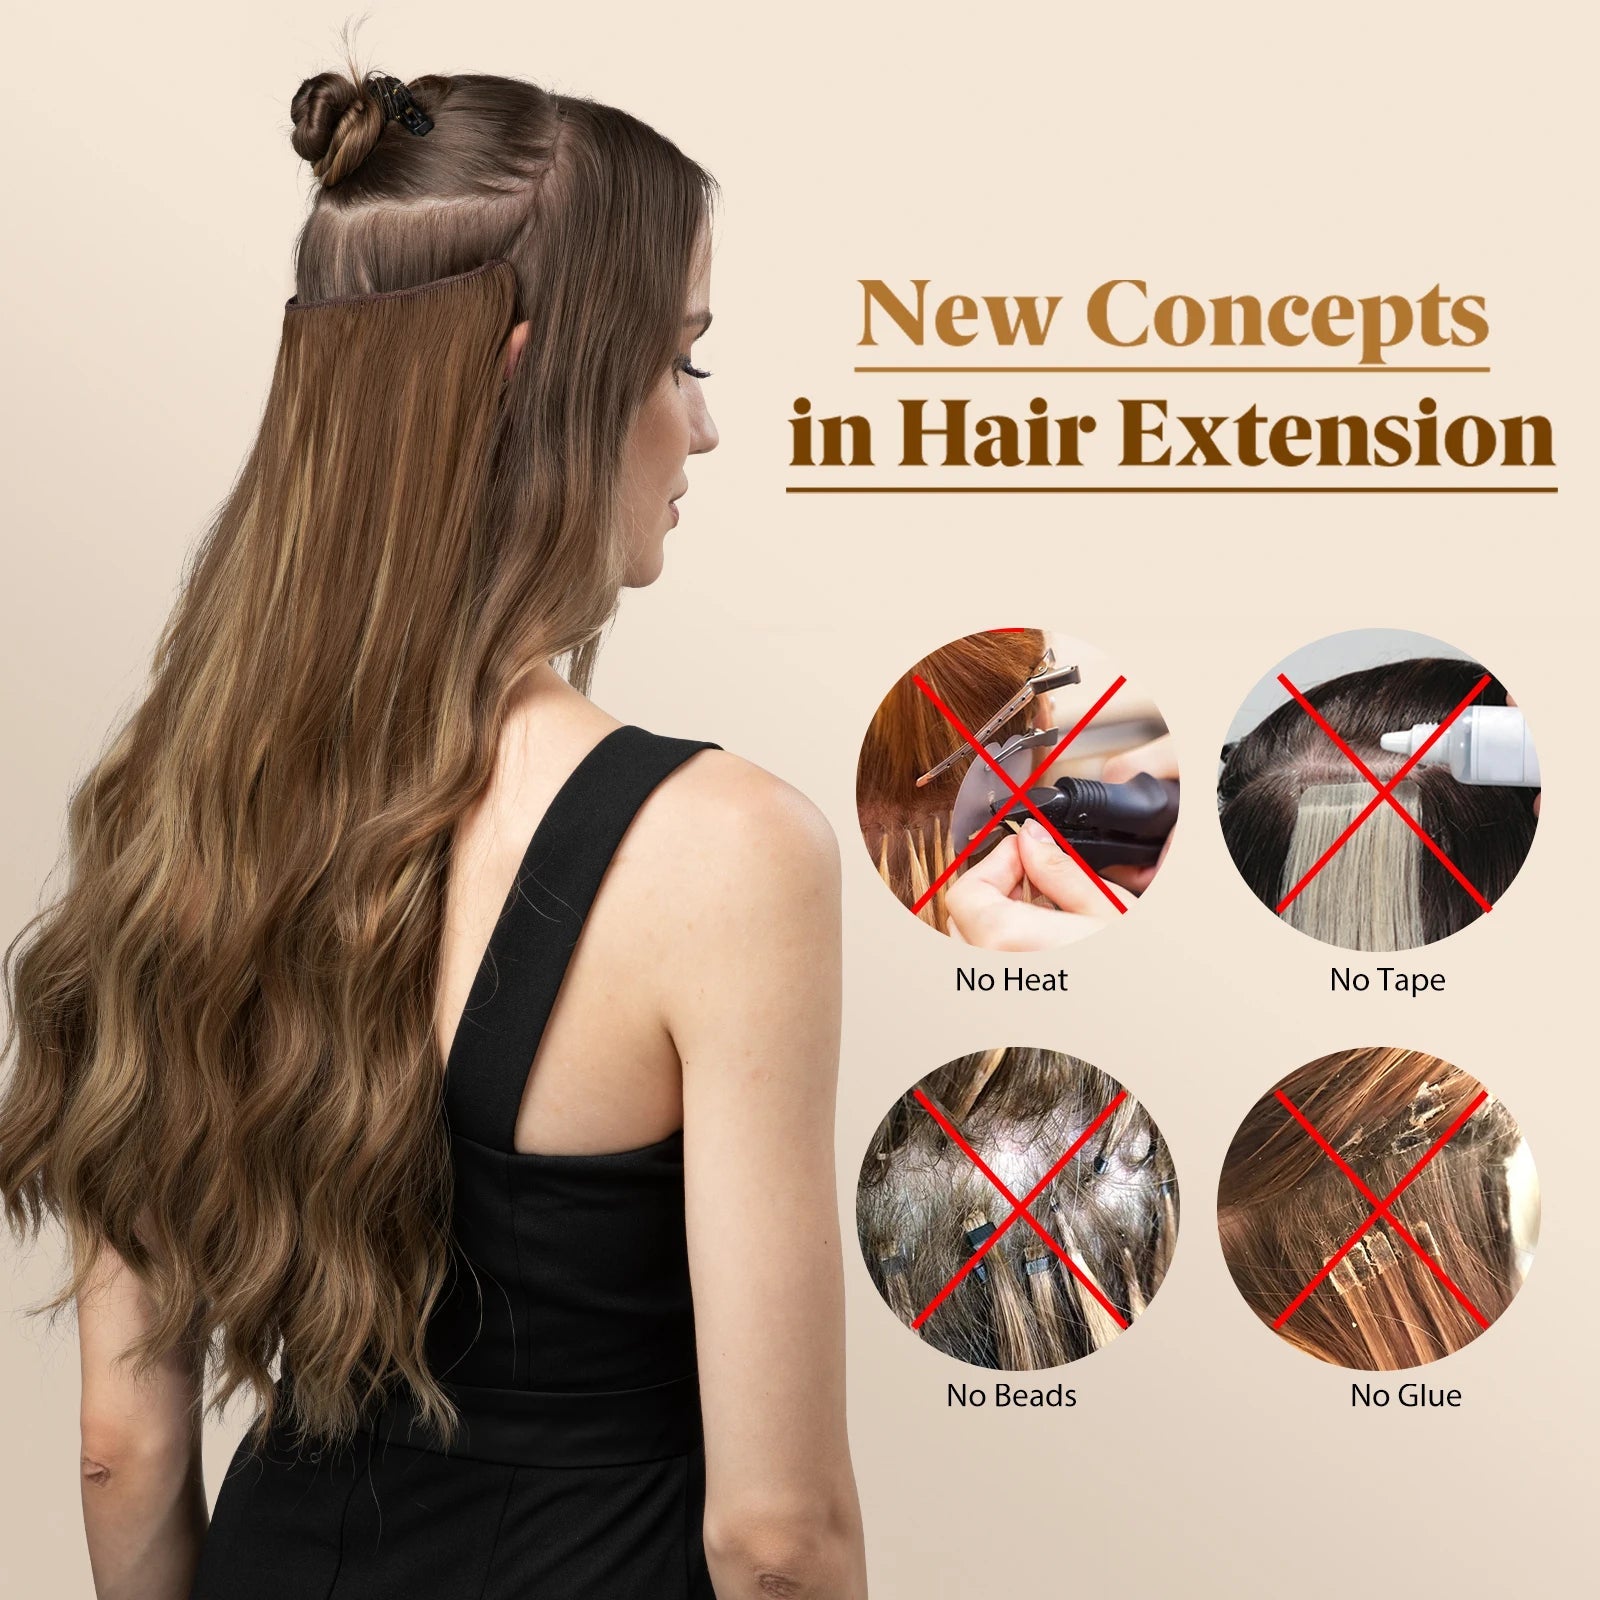 Halo Hair Extensions - No Braids, Glue, or Drama Needed